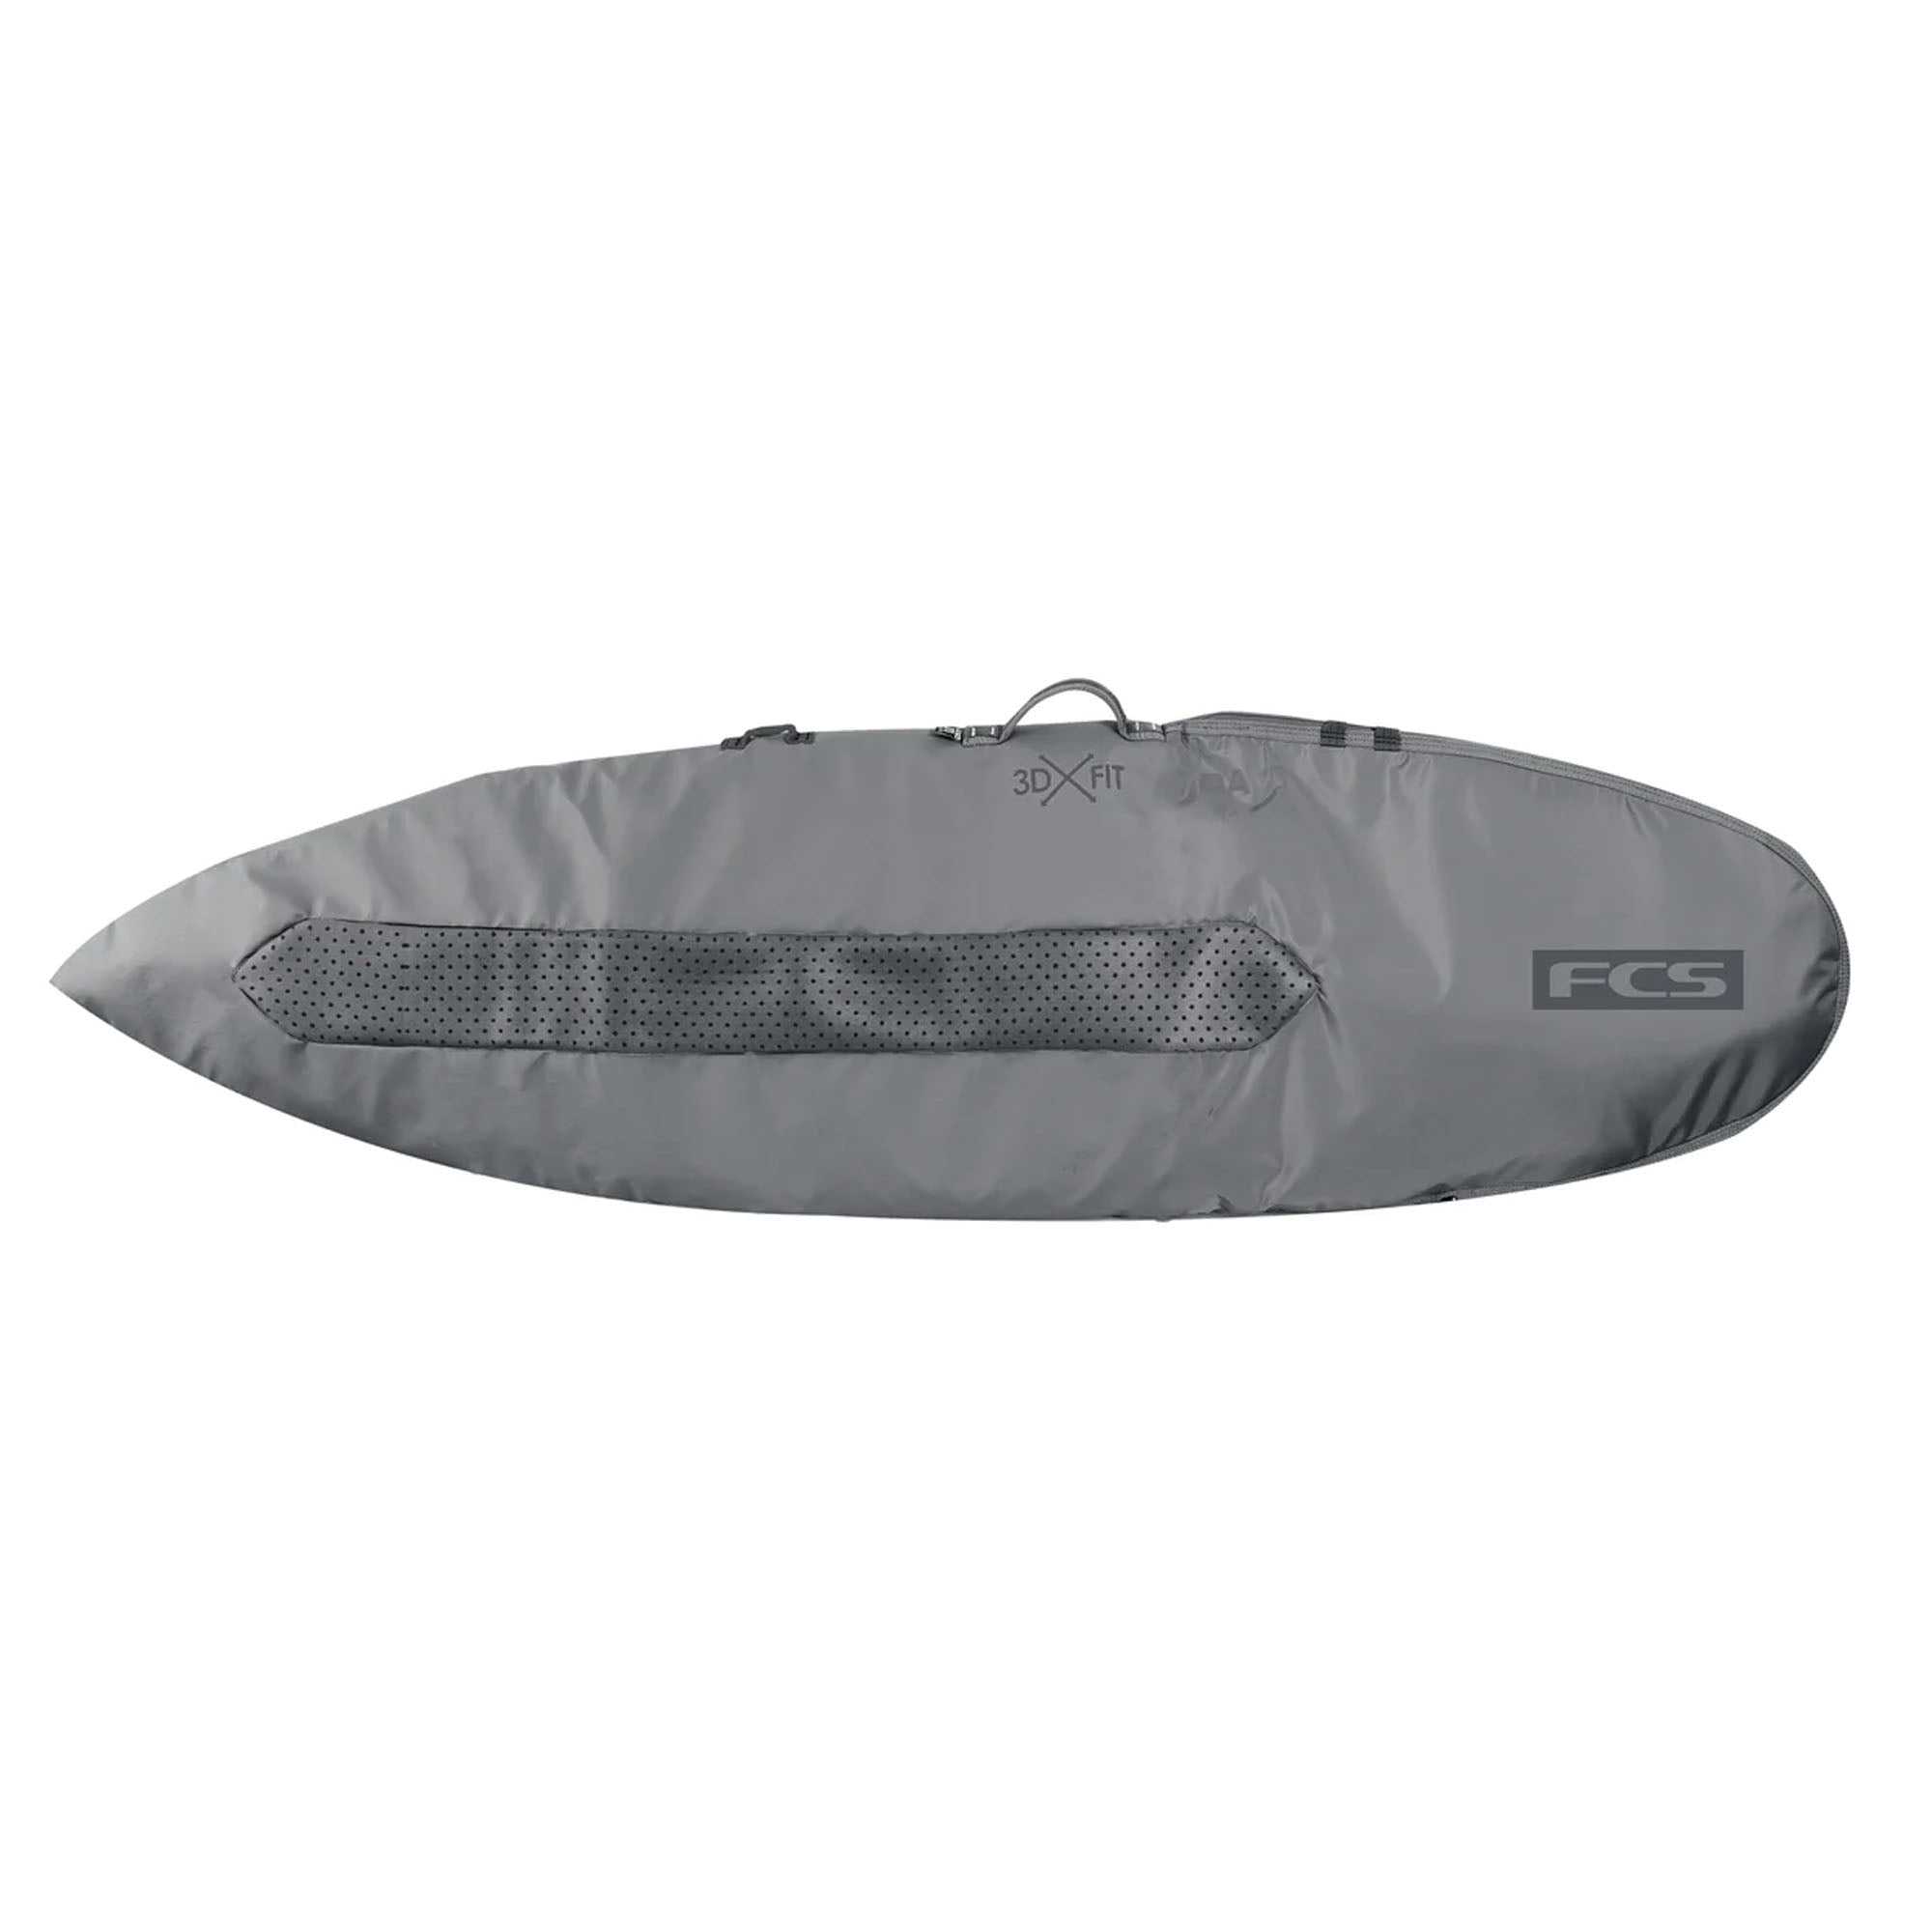 FCS 3DxFit Day All Purpose Surfboard Bag